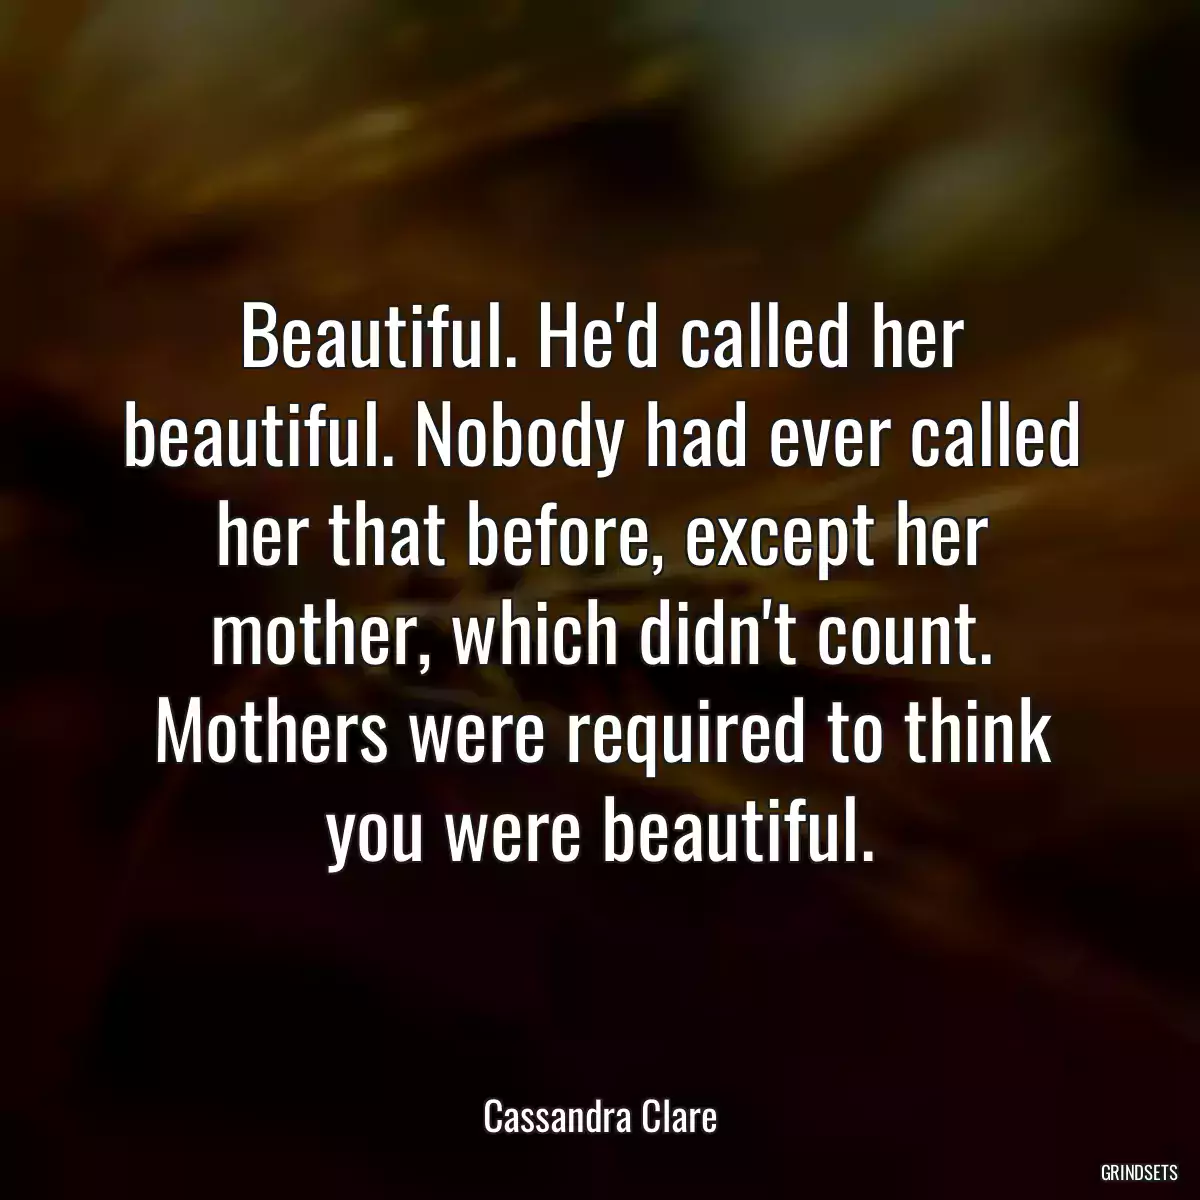 Beautiful. He\'d called her beautiful. Nobody had ever called her that before, except her mother, which didn\'t count. Mothers were required to think you were beautiful.